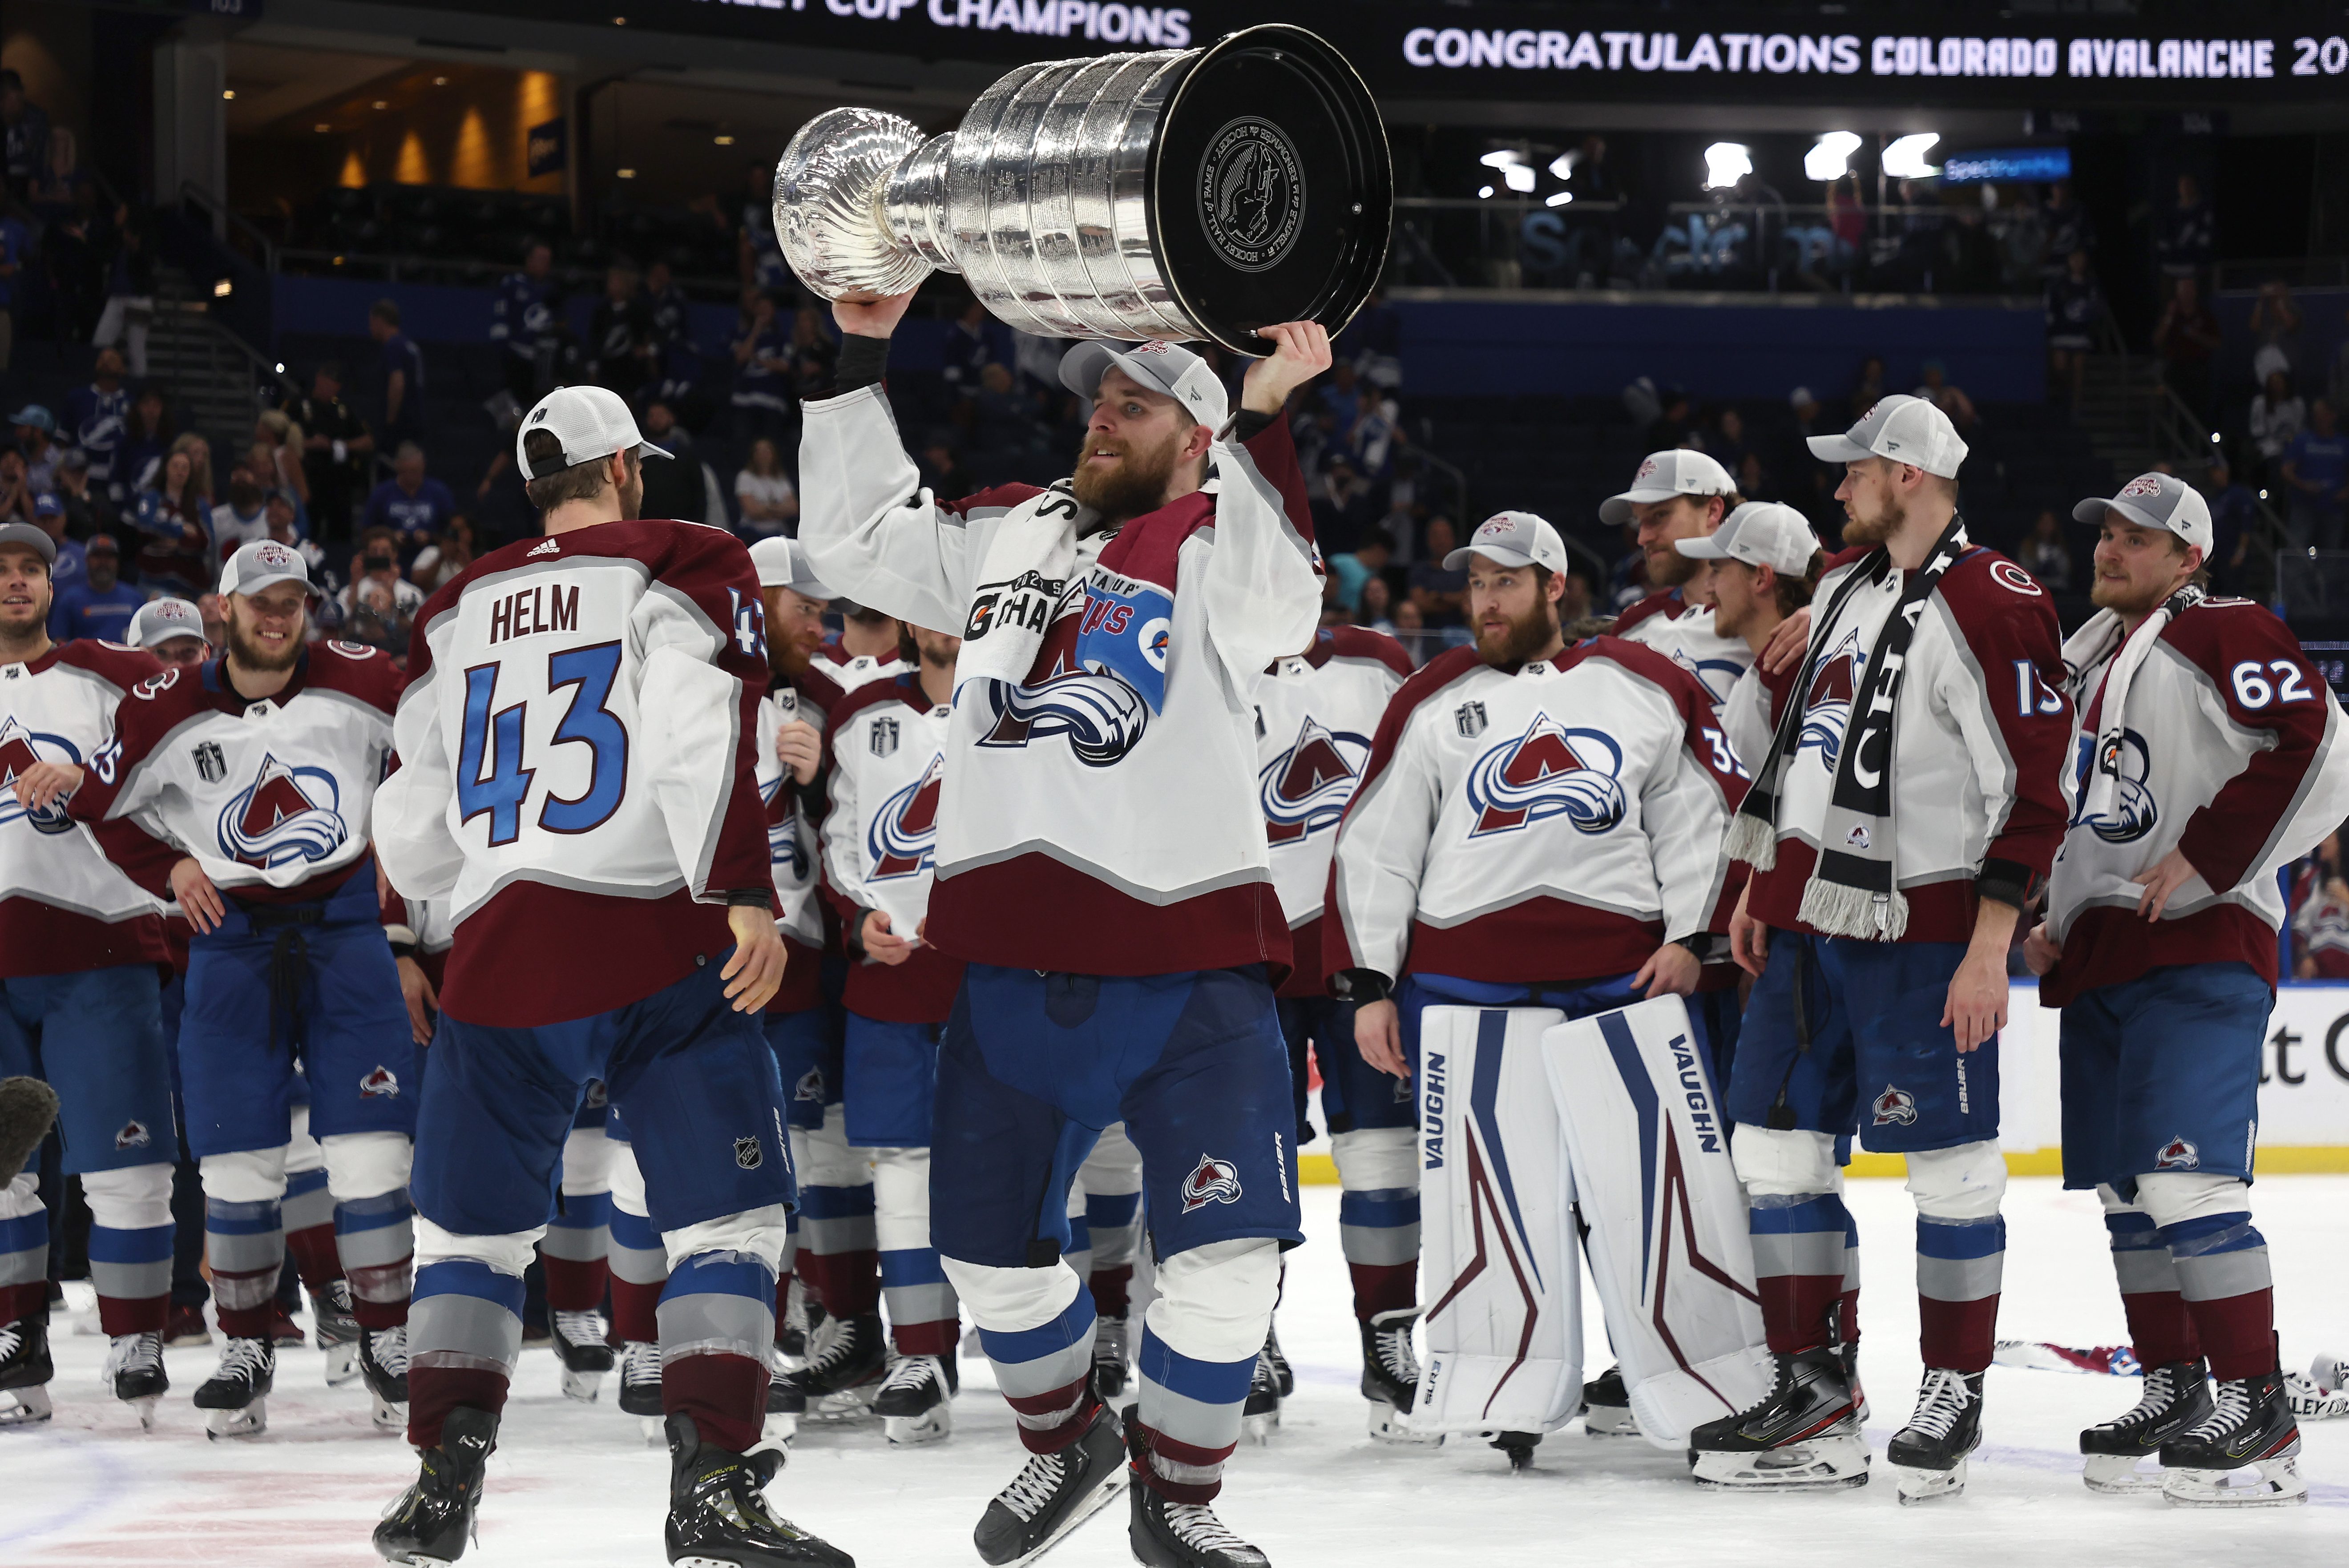 Avalanche win 3rd Stanley Cup in franchise history, defeat